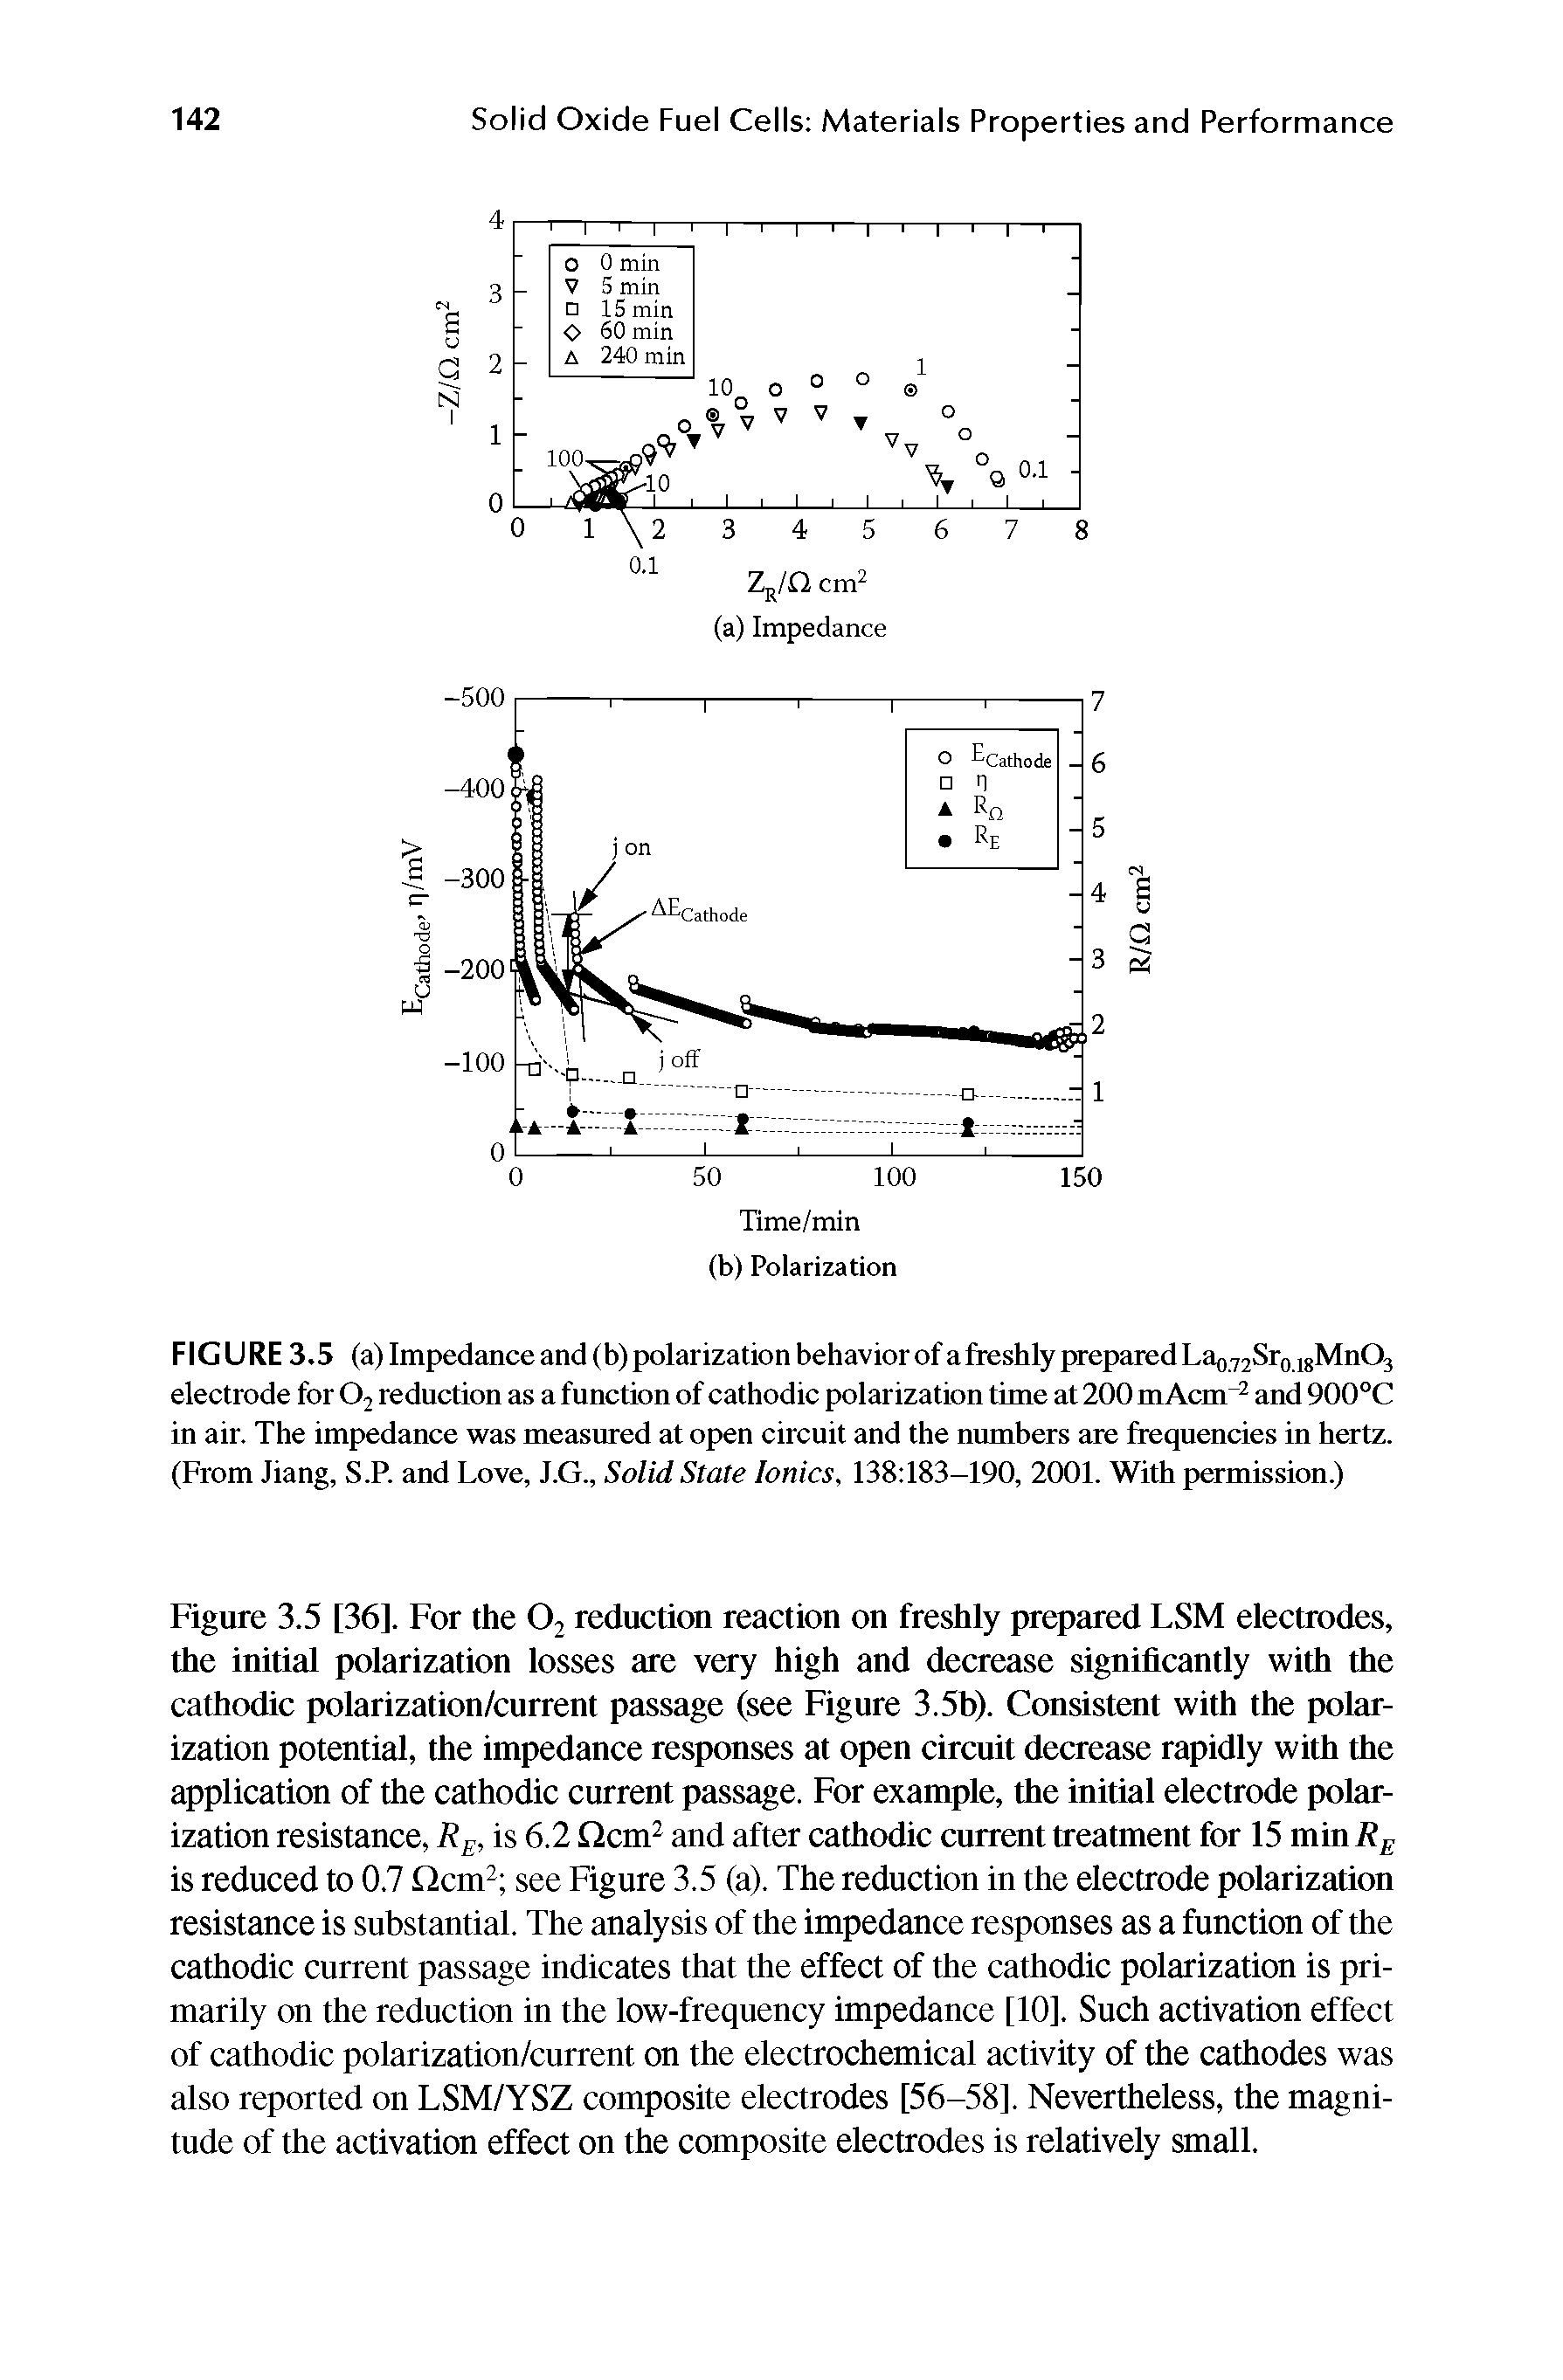 Figure 3.5 [36], For the 02 reduction reaction on freshly prepared LSM electrodes, the initial polarization losses are very high and decrease significantly with the cathodic polarization/current passage (see Figure 3.5b). Consistent with the polarization potential, the impedance responses at open circuit decrease rapidly with the application of the cathodic current passage. For example, the initial electrode polarization resistance, RE, is 6.2 Qcm2 and after cathodic current treatment for 15 min RK is reduced to 0.7 Qcm2 see Figure 3.5 (a). The reduction in the electrode polarization resistance is substantial. The analysis of the impedance responses as a function of the cathodic current passage indicates that the effect of the cathodic polarization is primarily on the reduction in the low-frequency impedance [10]. Such activation effect of cathodic polarization/current on the electrochemical activity of the cathodes was also reported on LSM/YSZ composite electrodes [56-58], Nevertheless, the magnitude of the activation effect on the composite electrodes is relatively small.